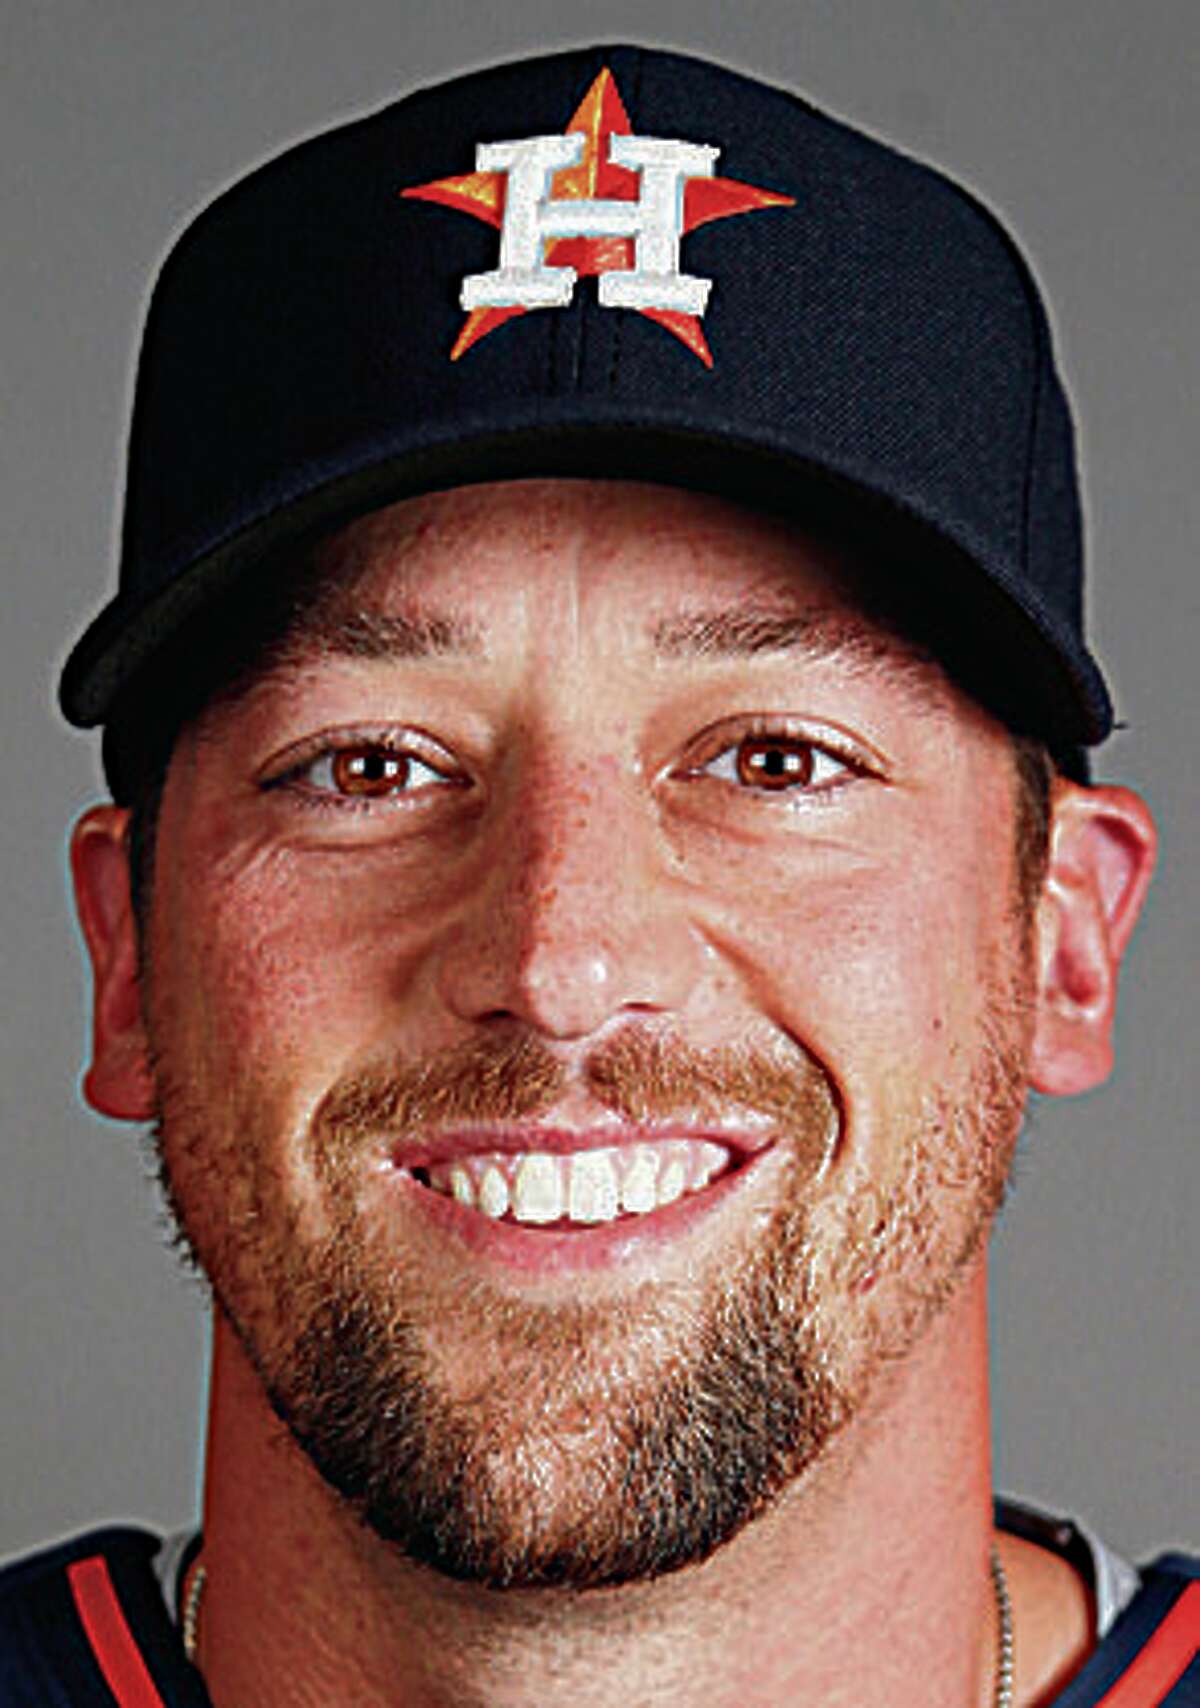 Houston Astros relief pitcher Luke Gregerson photographed during Houston Astros spring training at the Osceola County facility, Thursday, Feb. 26, 2015, in Kissimmee. ( Karen Warren / Houston Chronicle )